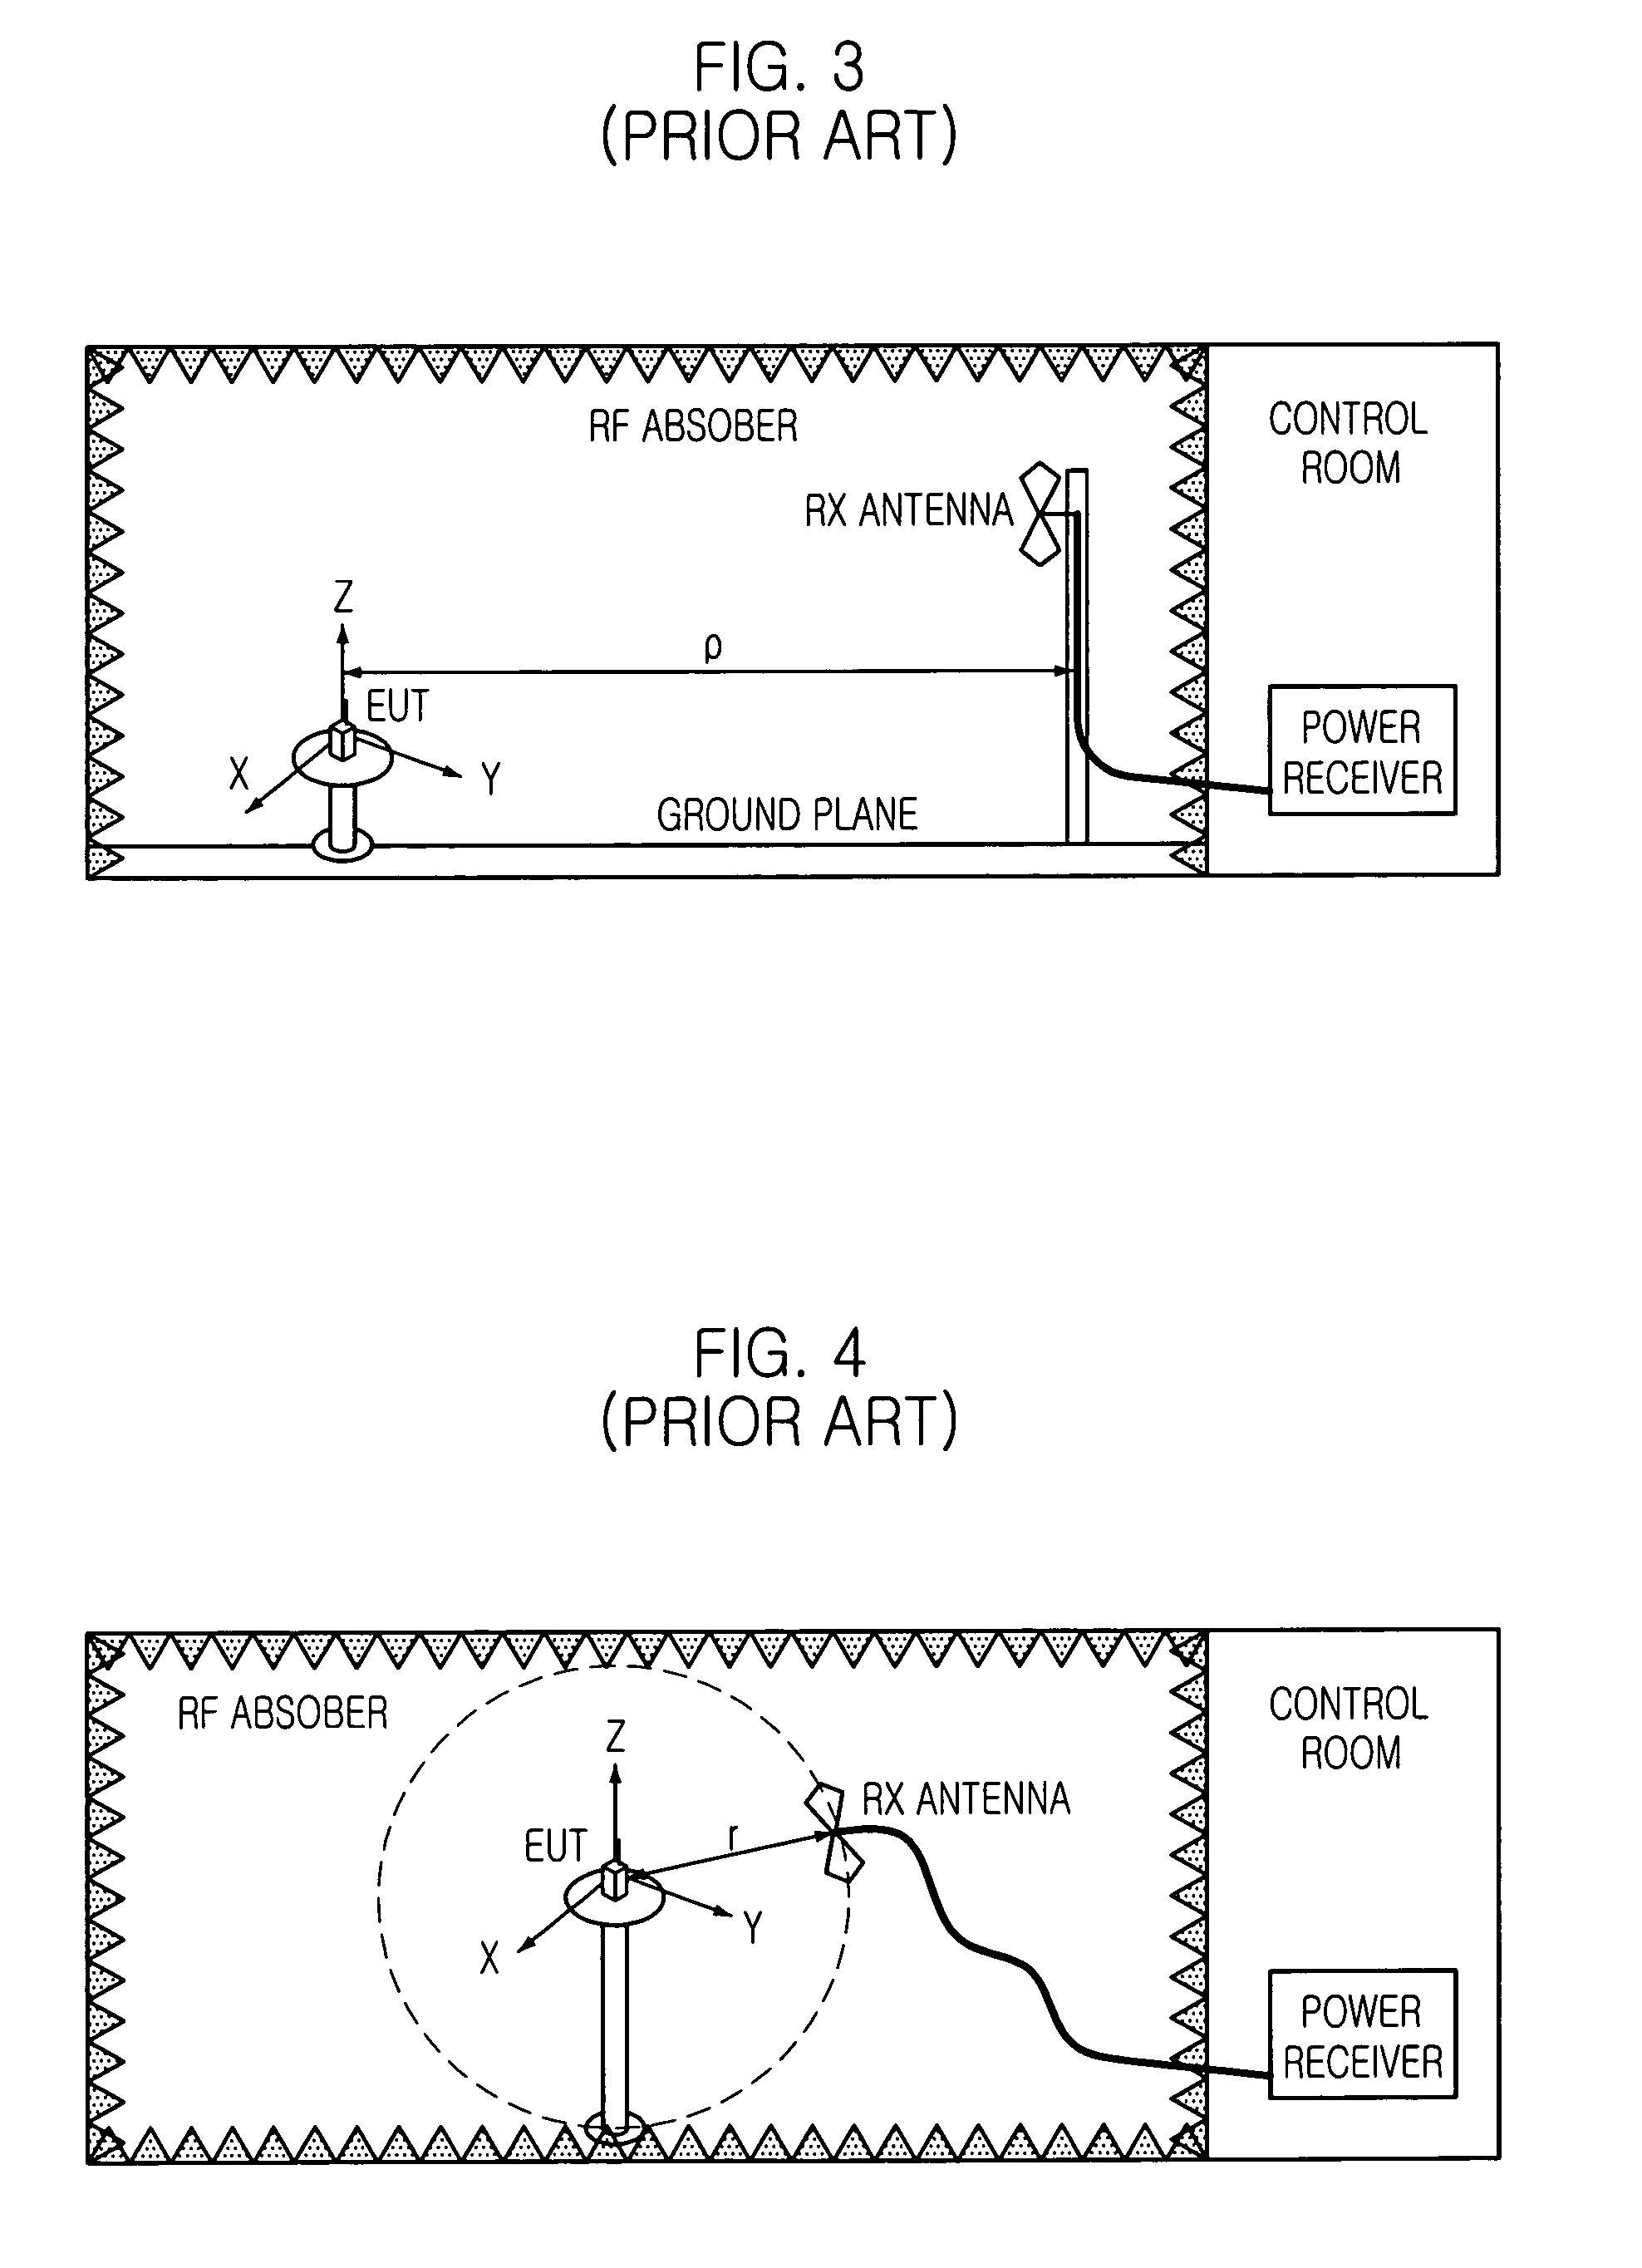 Method for measuring electromagnetic radiation pattern and gain of radiator using term waveguide